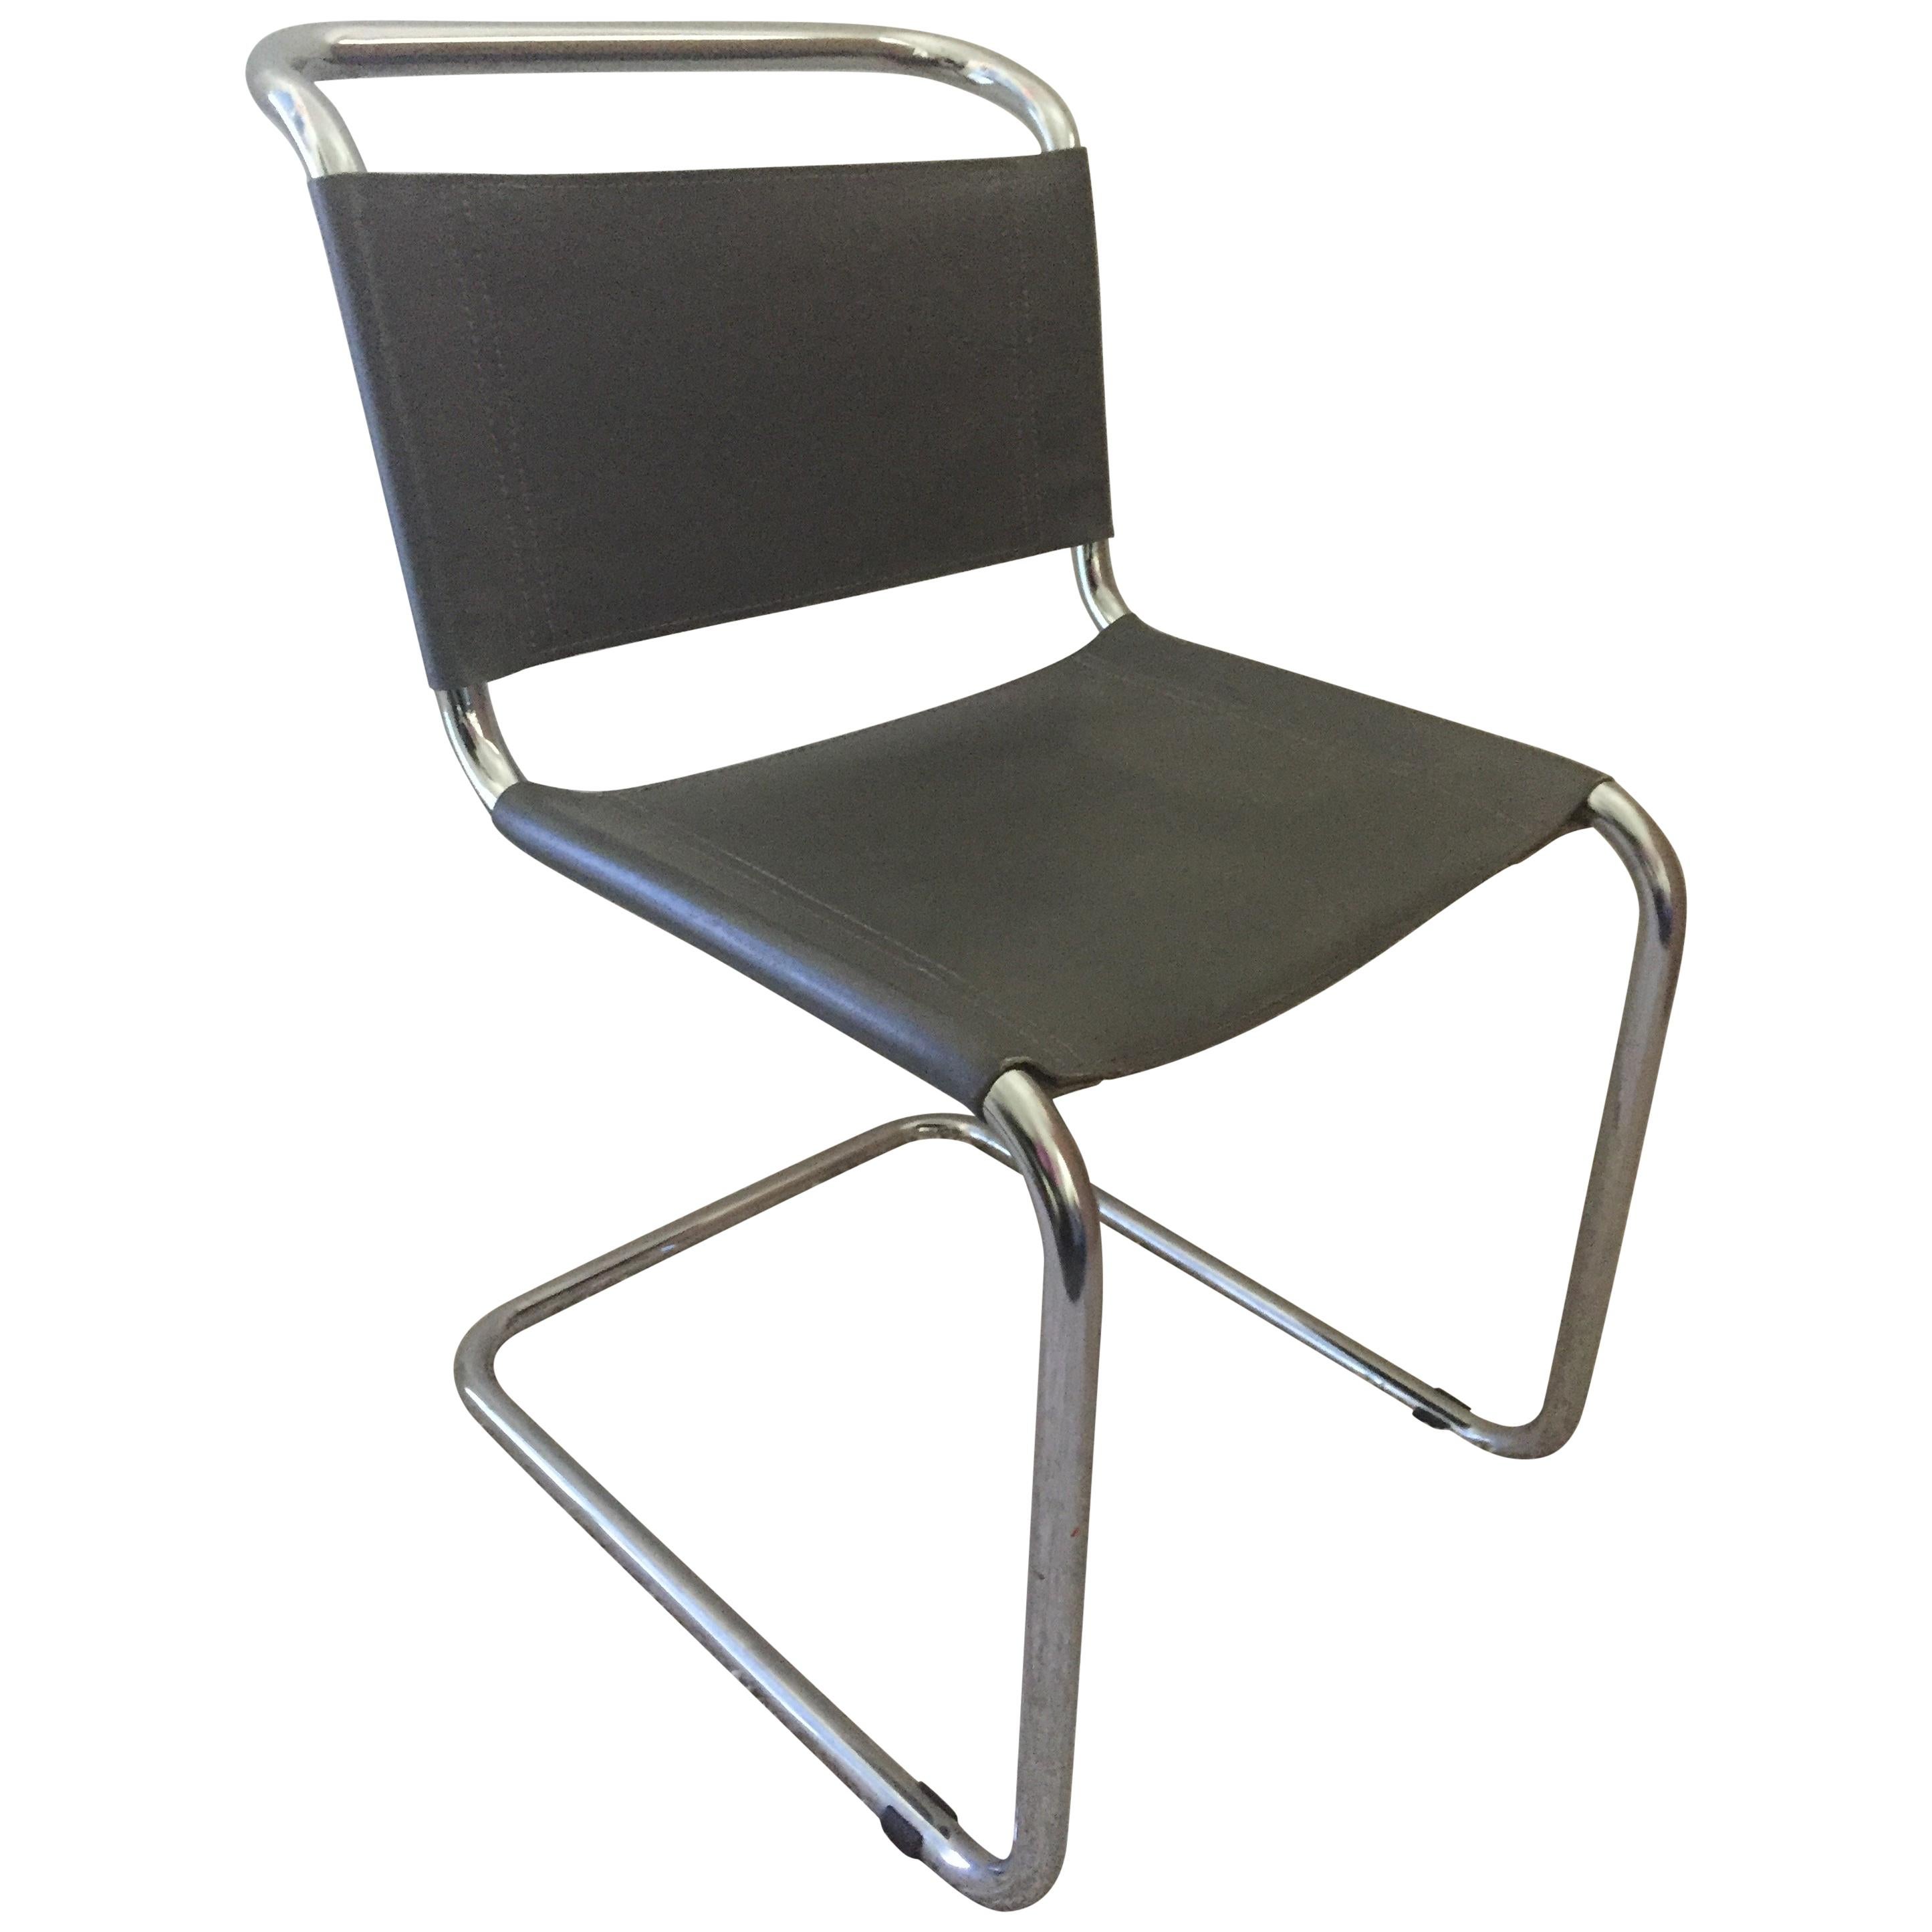 Pair of Mart Stam tubular chrome cantilevered chairs, with medium to light grey leather original seats and back, these chairs are similar to the design of Marcel Breuer chairs.